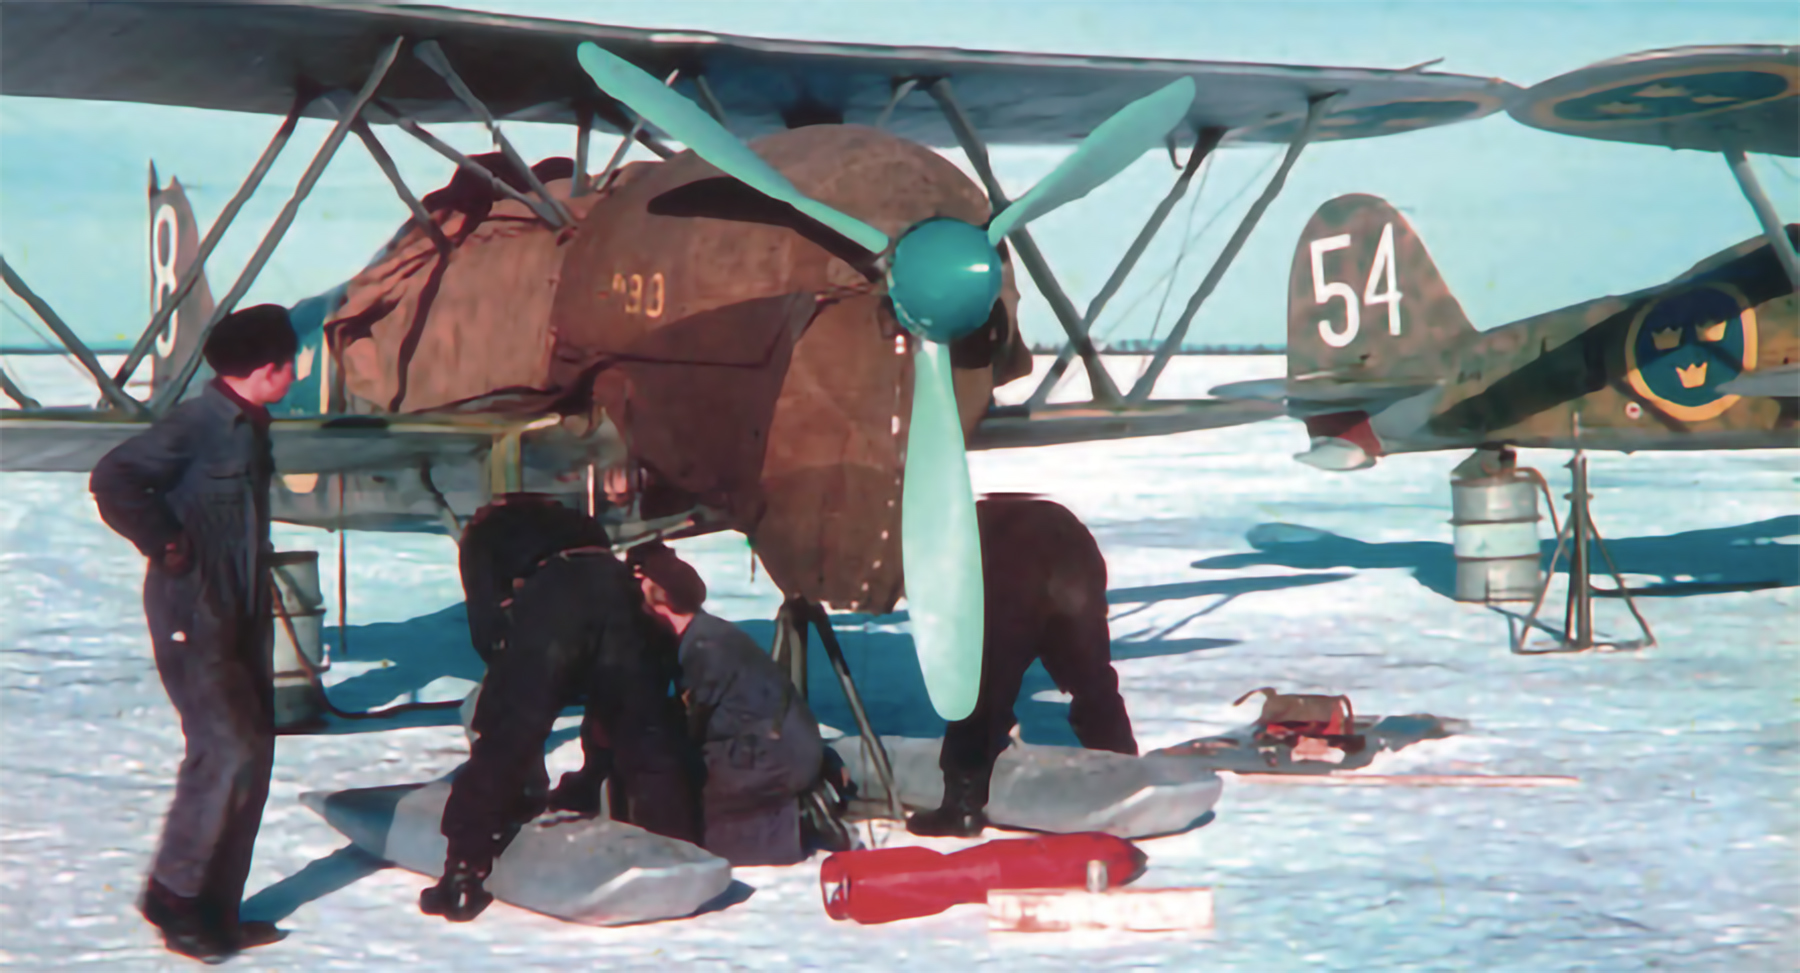 Fiat CR 42 Falco RSWAF White 54 being fitted with winter skis Sweden 1941 01